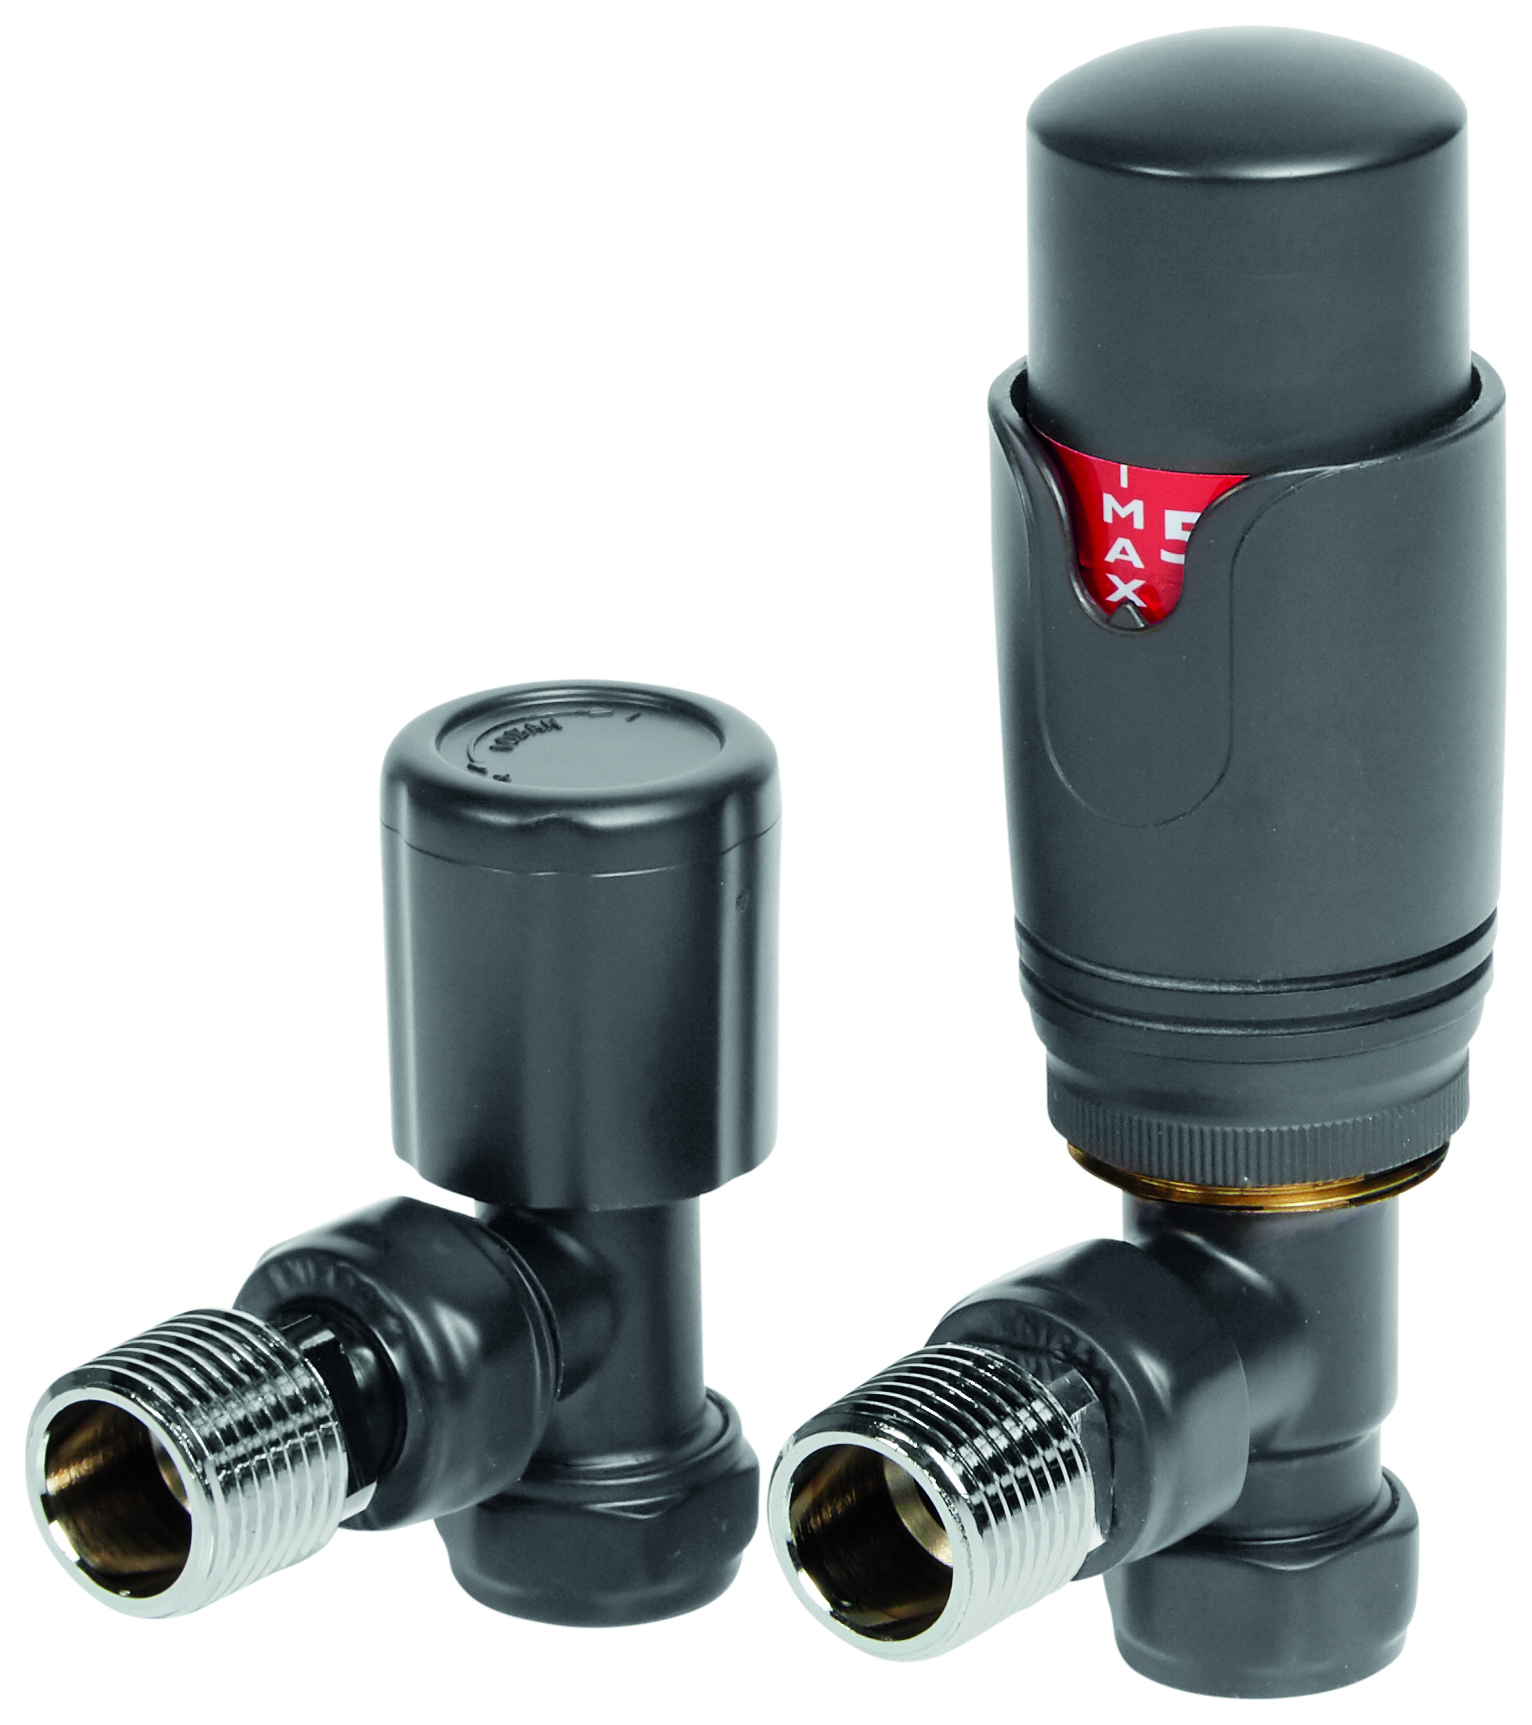 Image of Towelrads Angled Thermostatic Radiator Valve and Lockshield - Anthracite 15mm x 1/2"